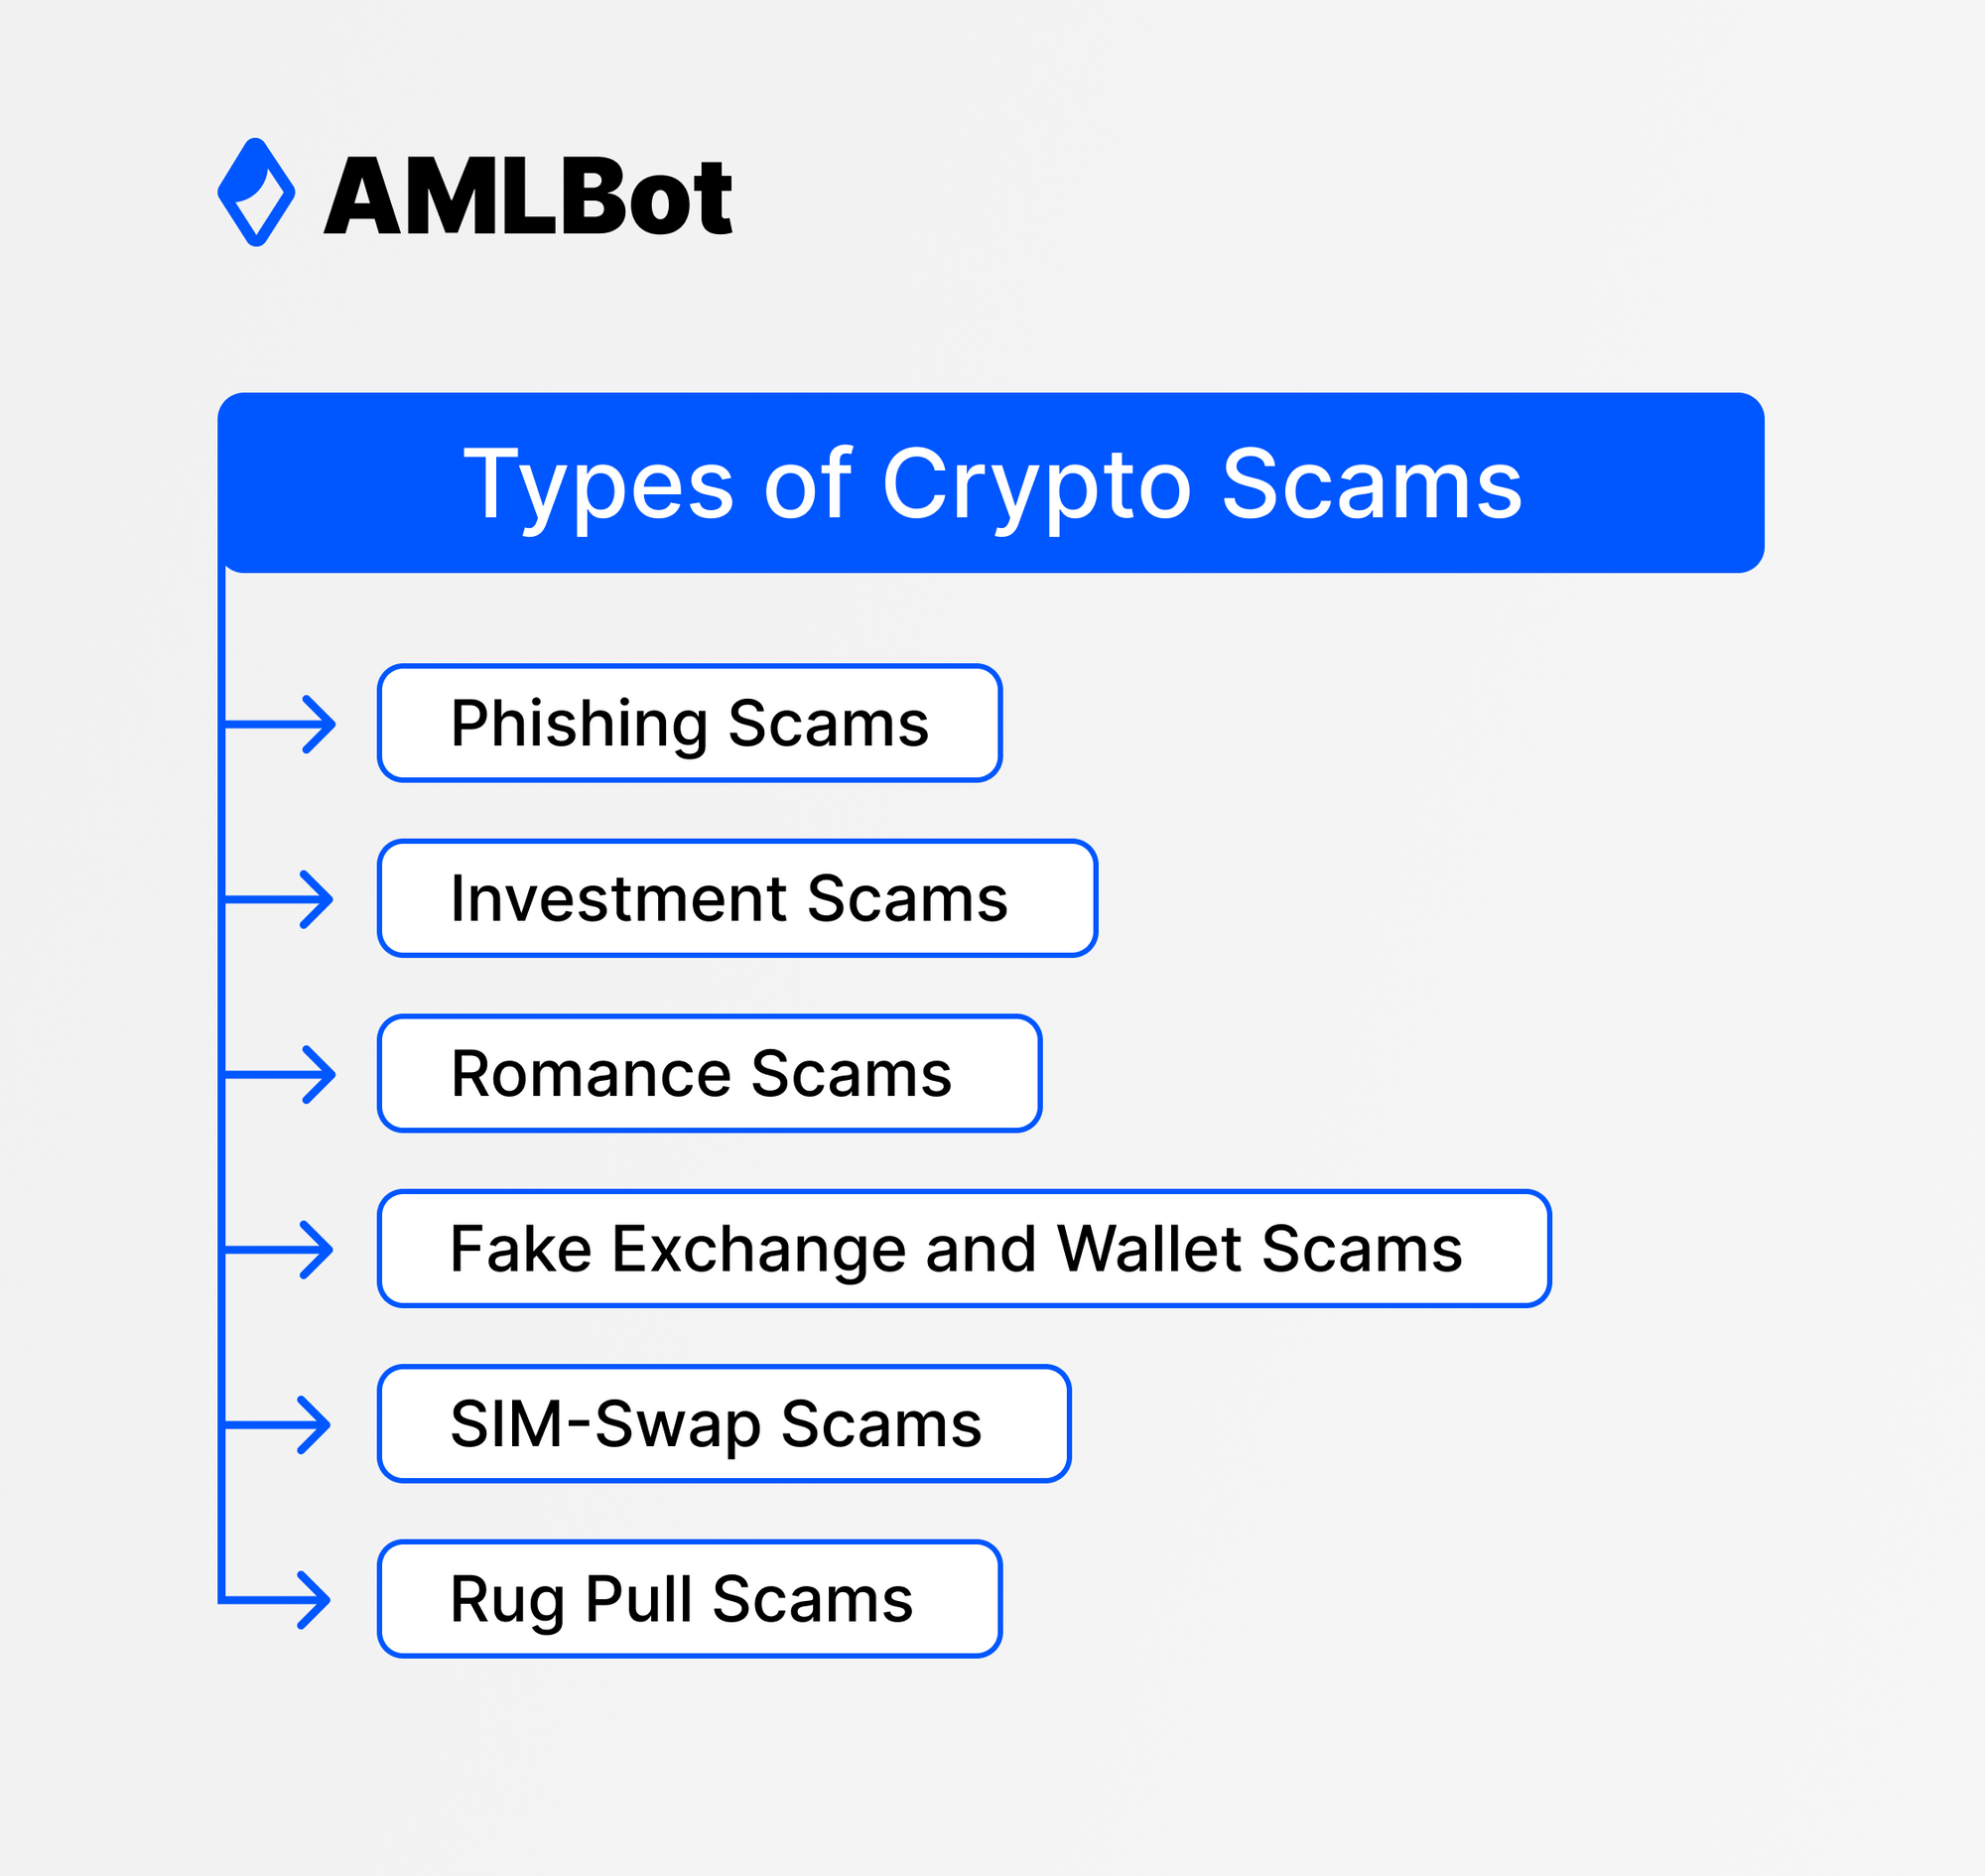 Types of Crypto Scams